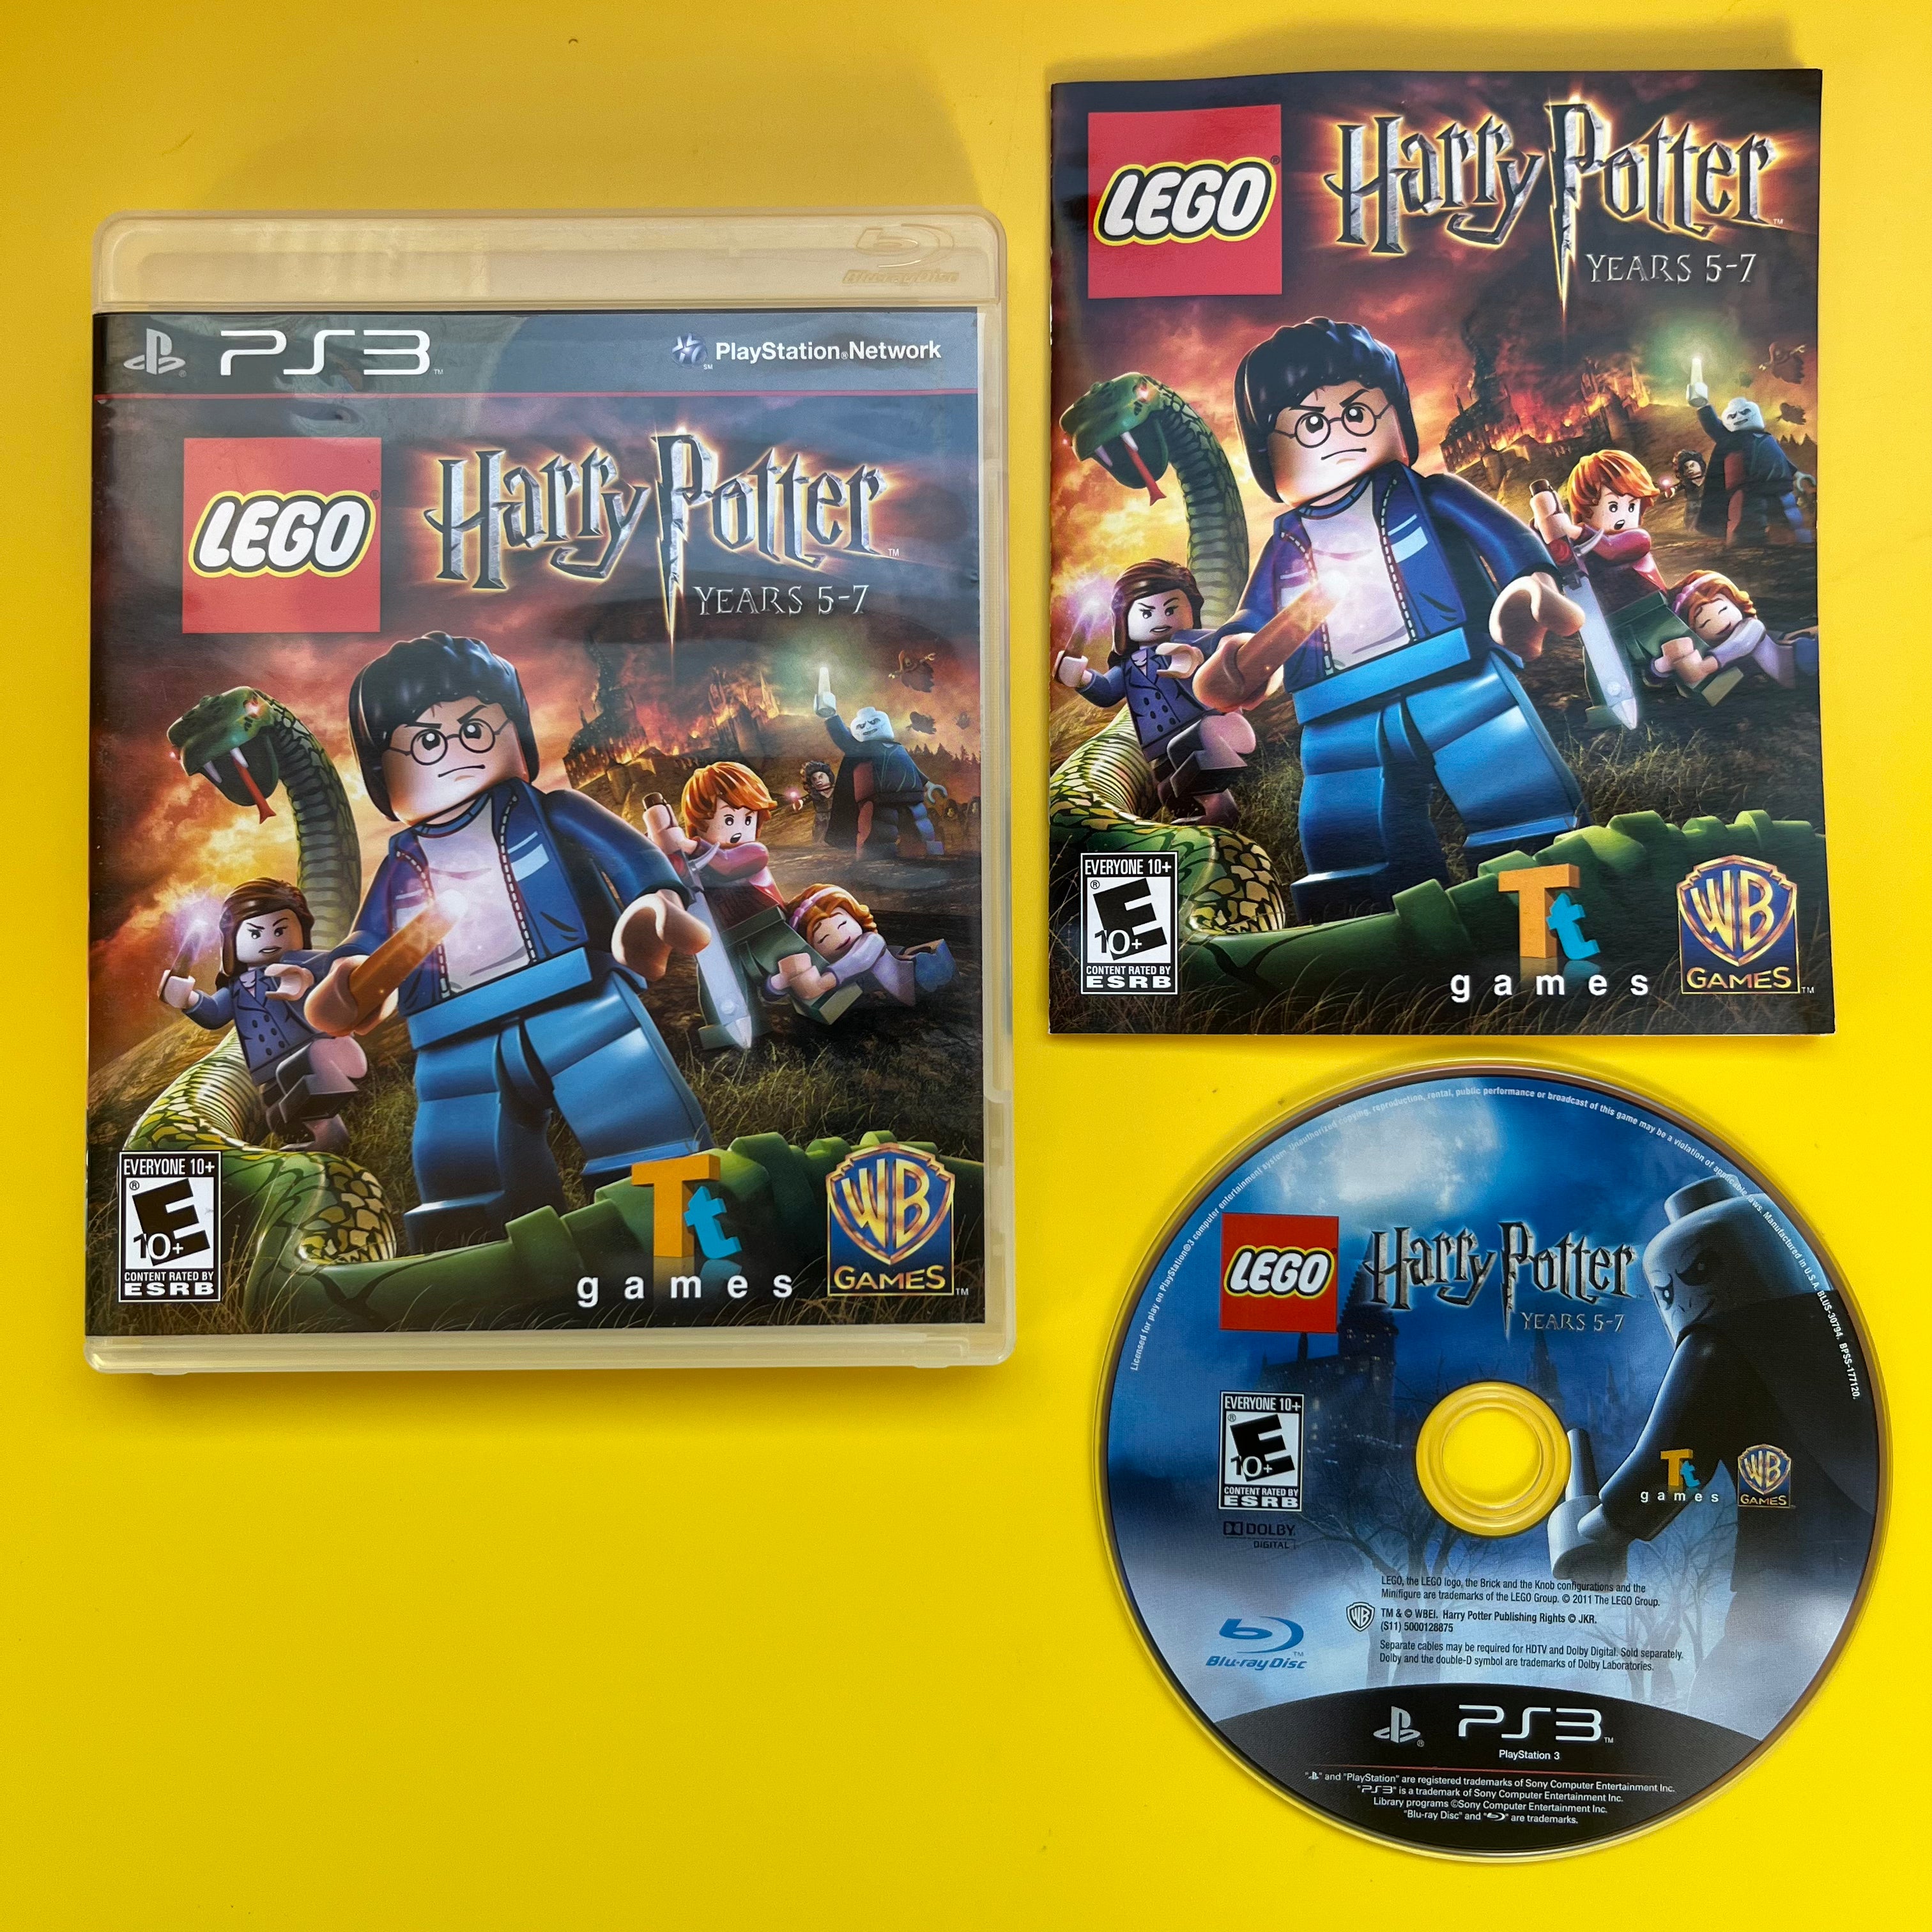 PS3 - Lego - Harry Potter Years 5-7